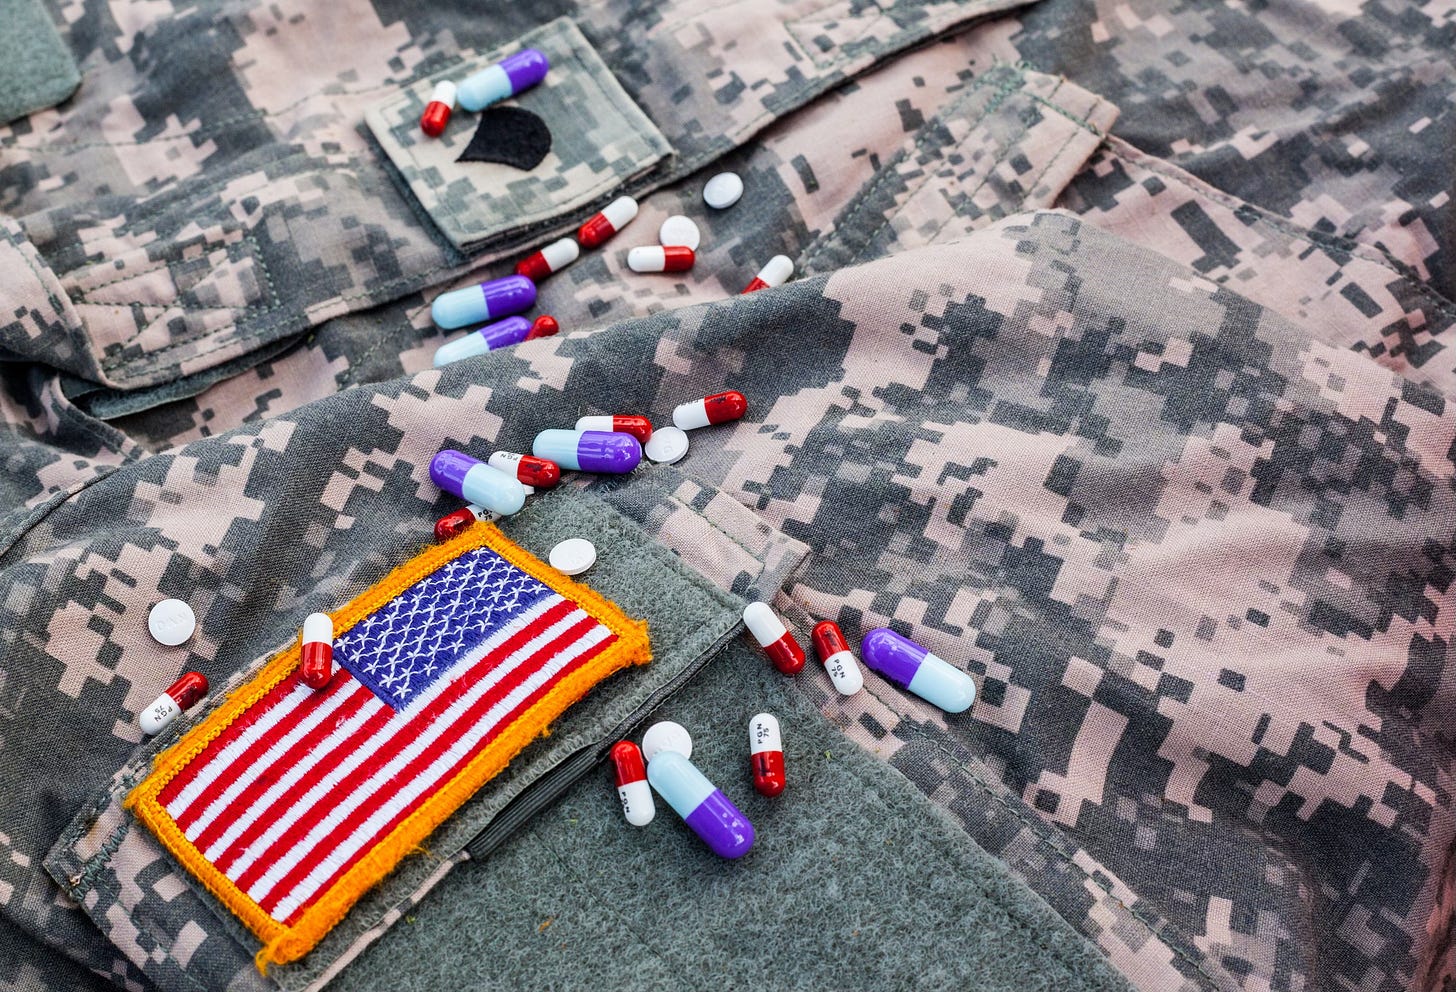 A variety of pills spilled across an ACU blouse with a specialist rank insignia and American flag on it